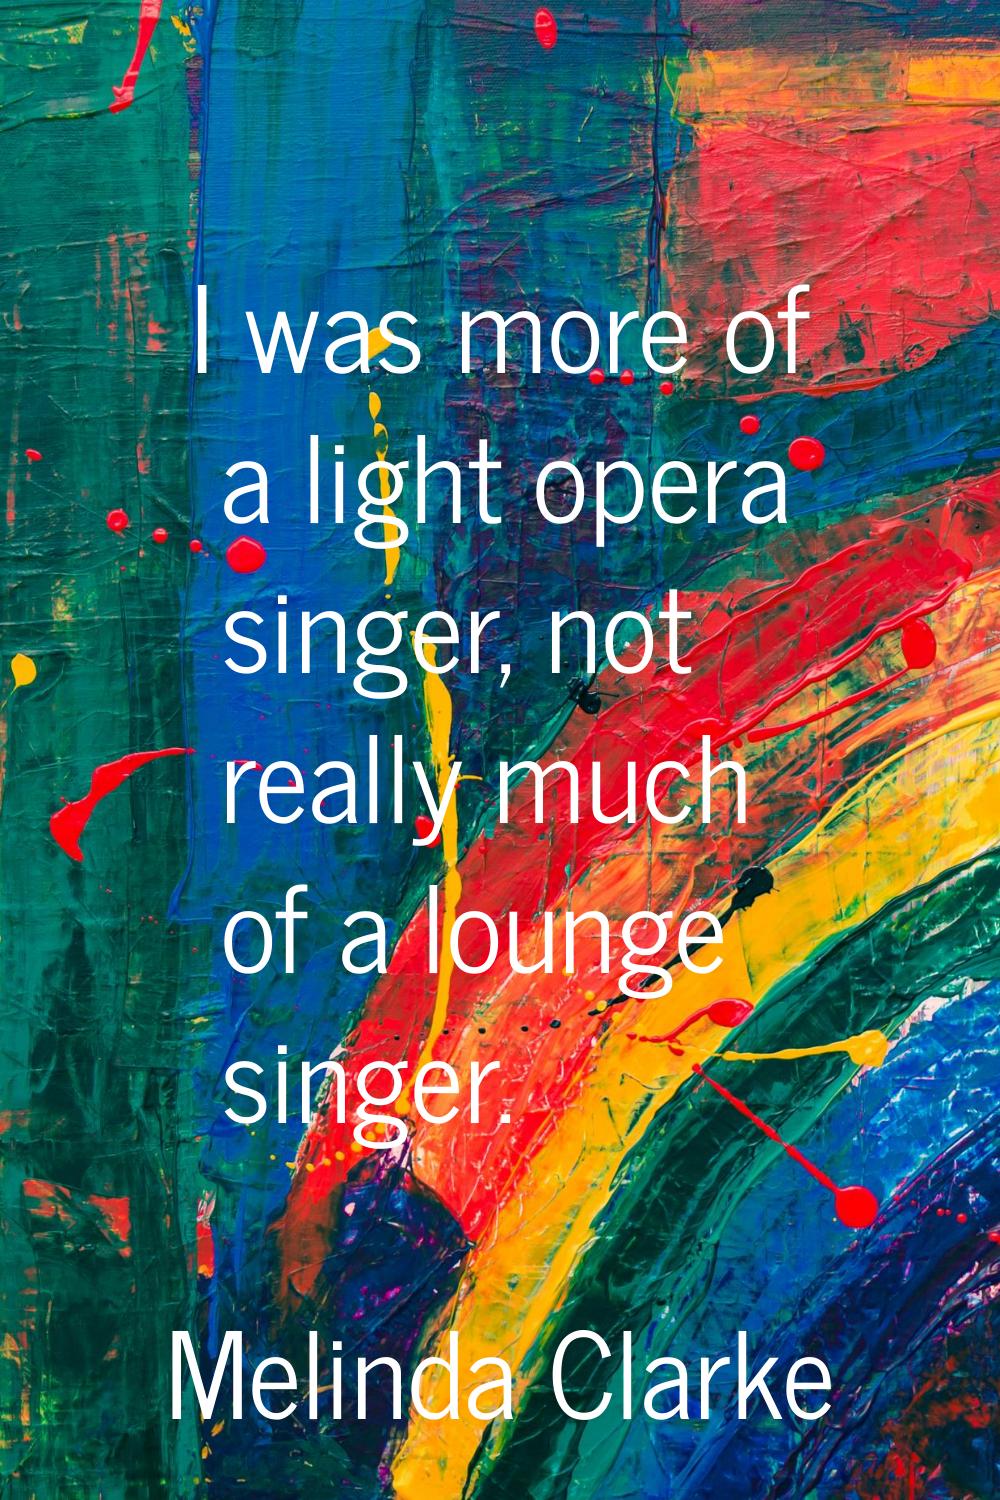 I was more of a light opera singer, not really much of a lounge singer.